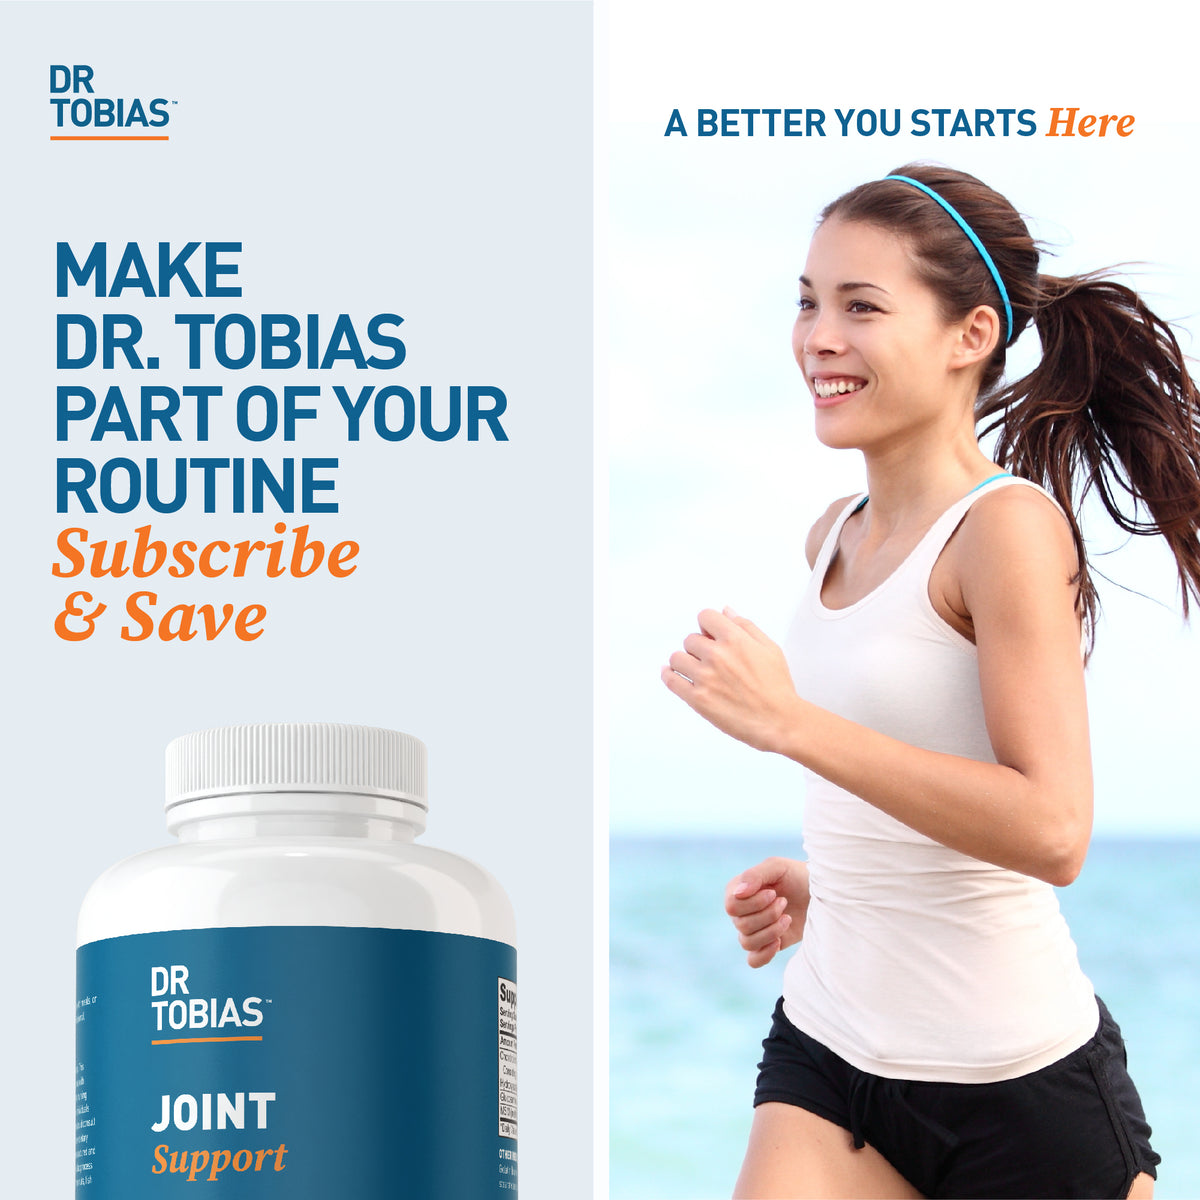 Dr. Tobias Joint Support, oint health supplements, joint support supplements